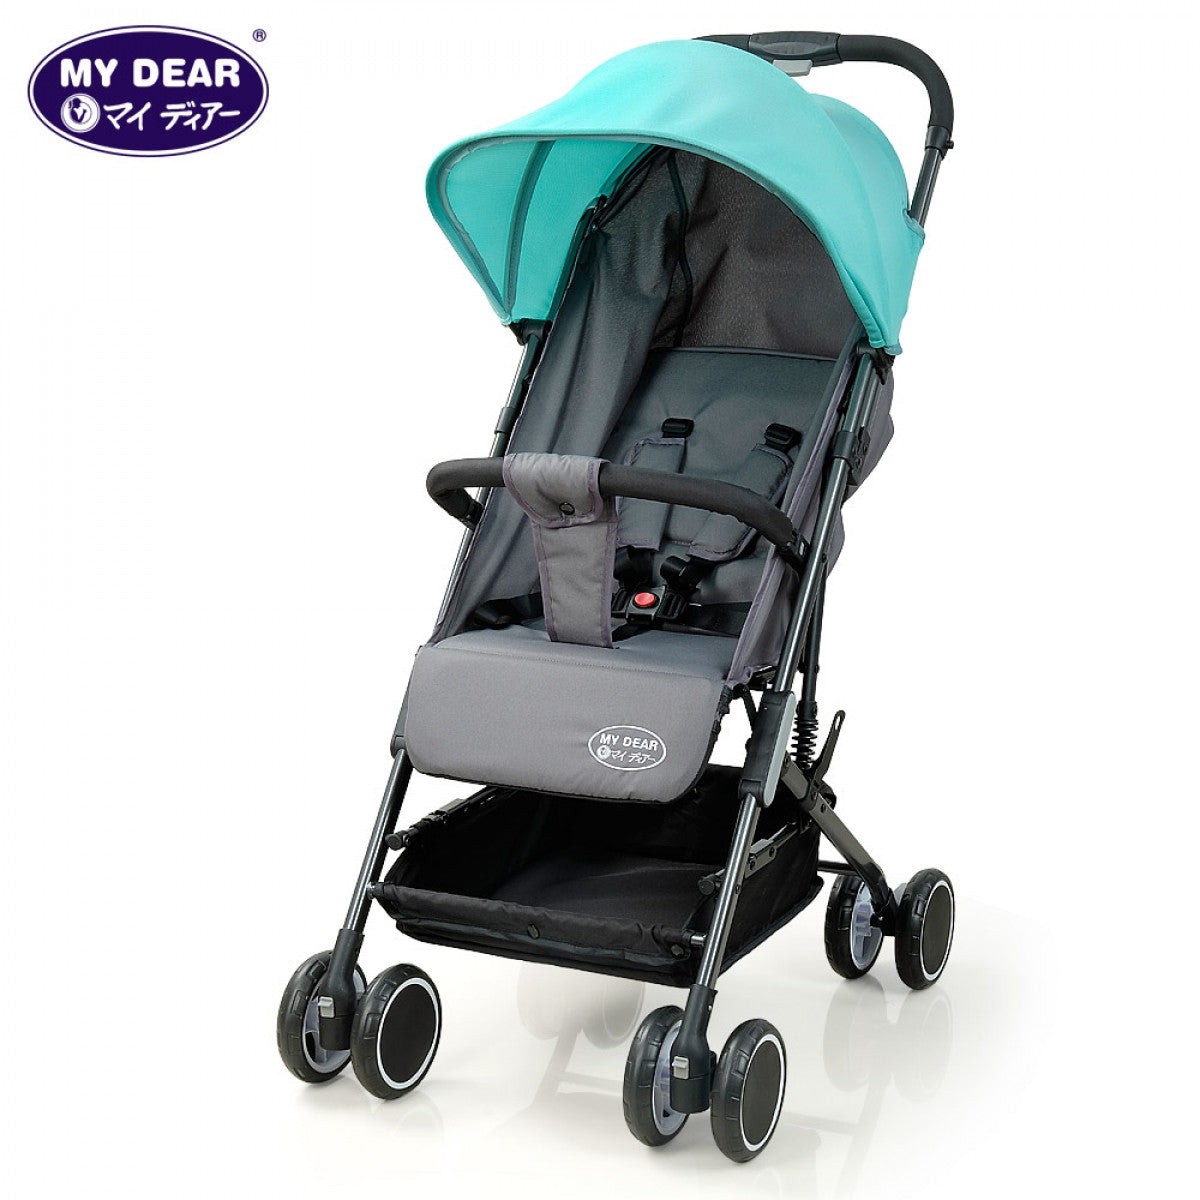 My Dear Baby Stroller 18125 With Storage Basket, Easy Fold & Compact